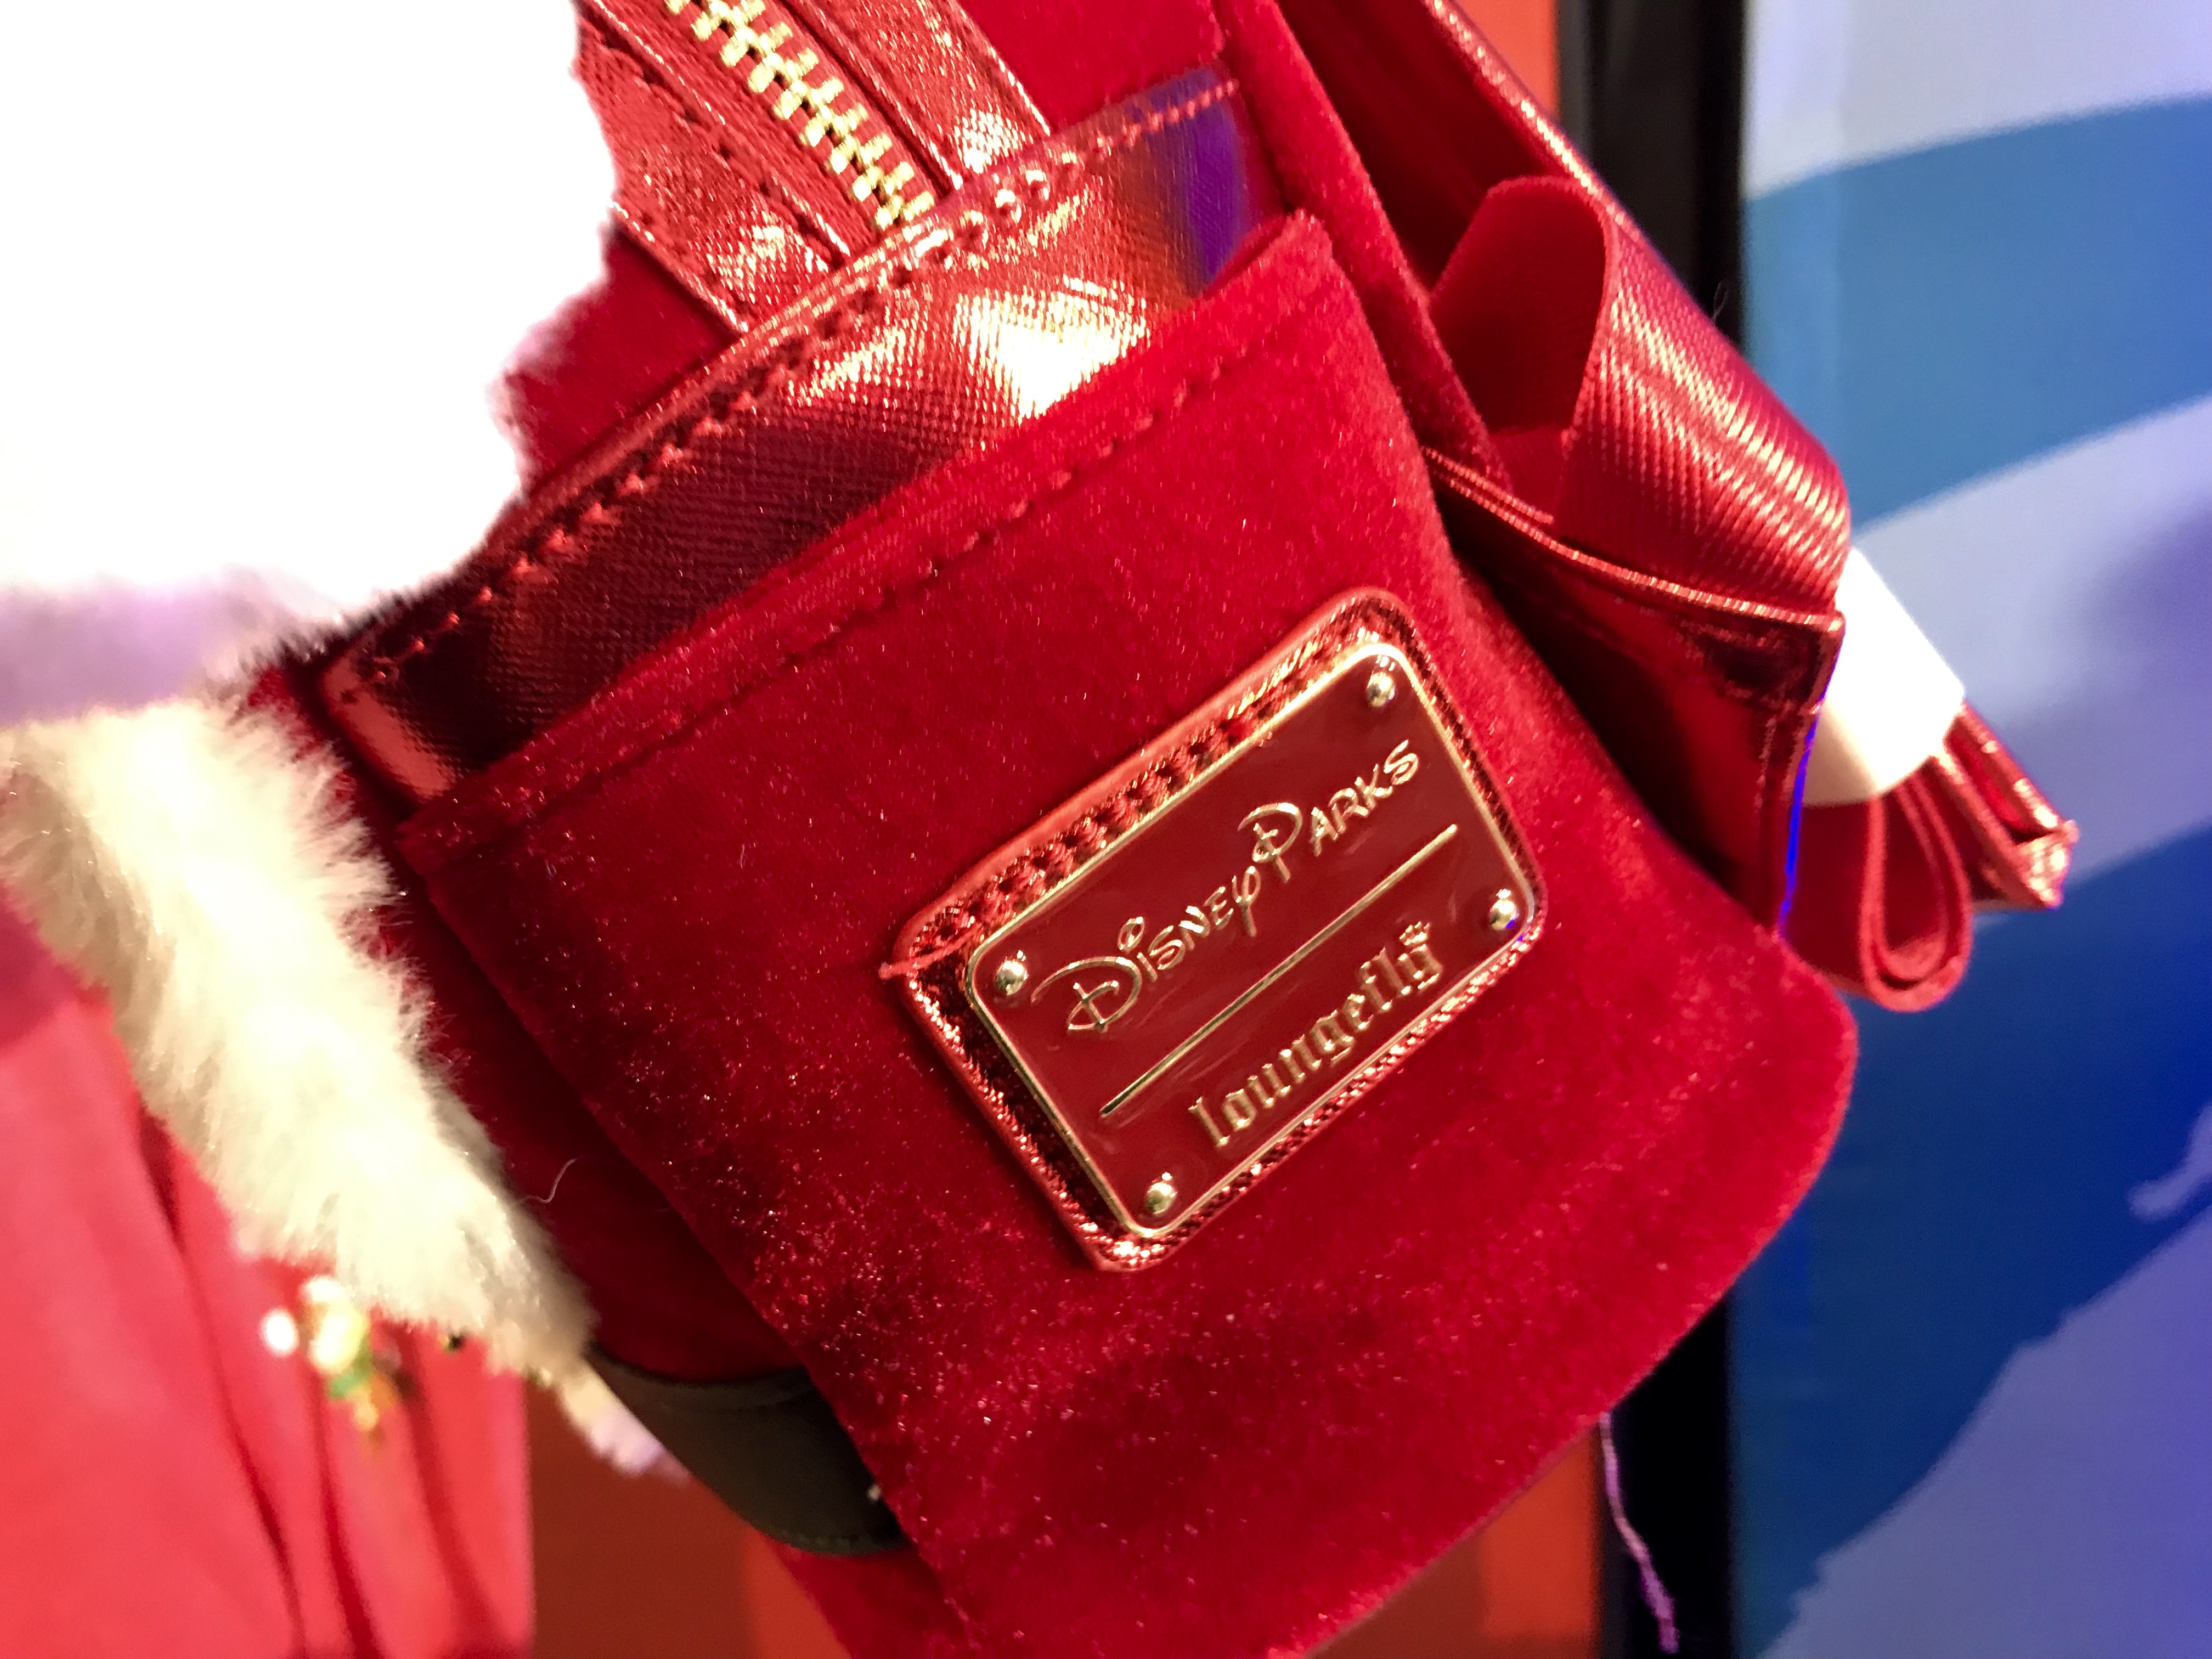 Festive New Disney Holiday Bags From Loungefly And More